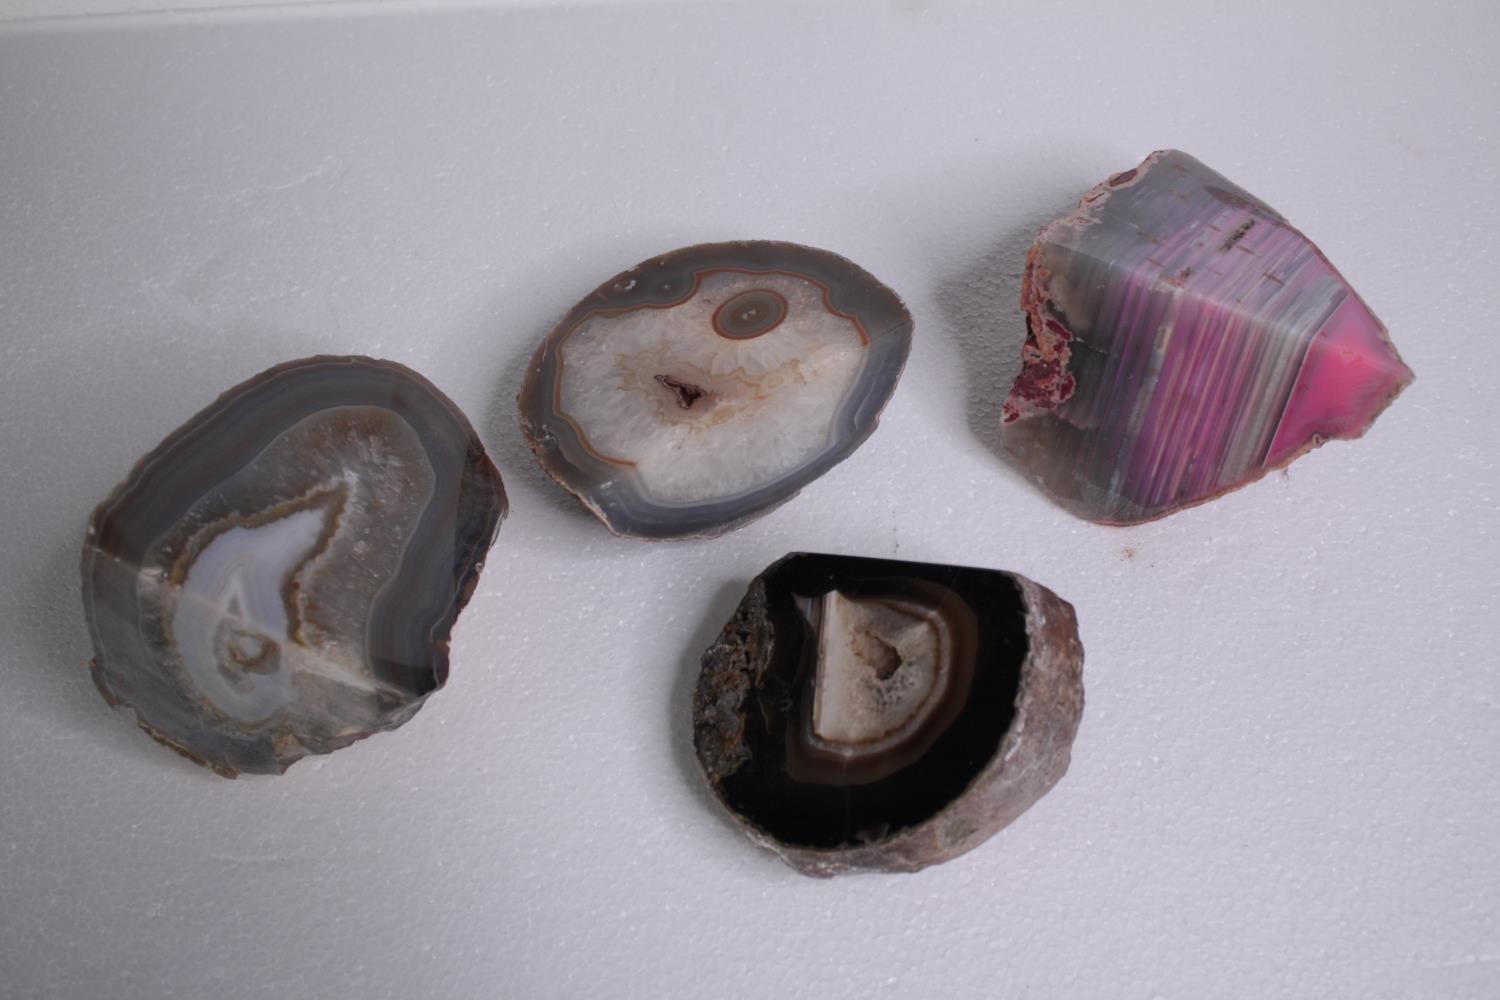 A collection of four Agate geode slices and pieces, some dyed. H.14 W.10cm. (largest)